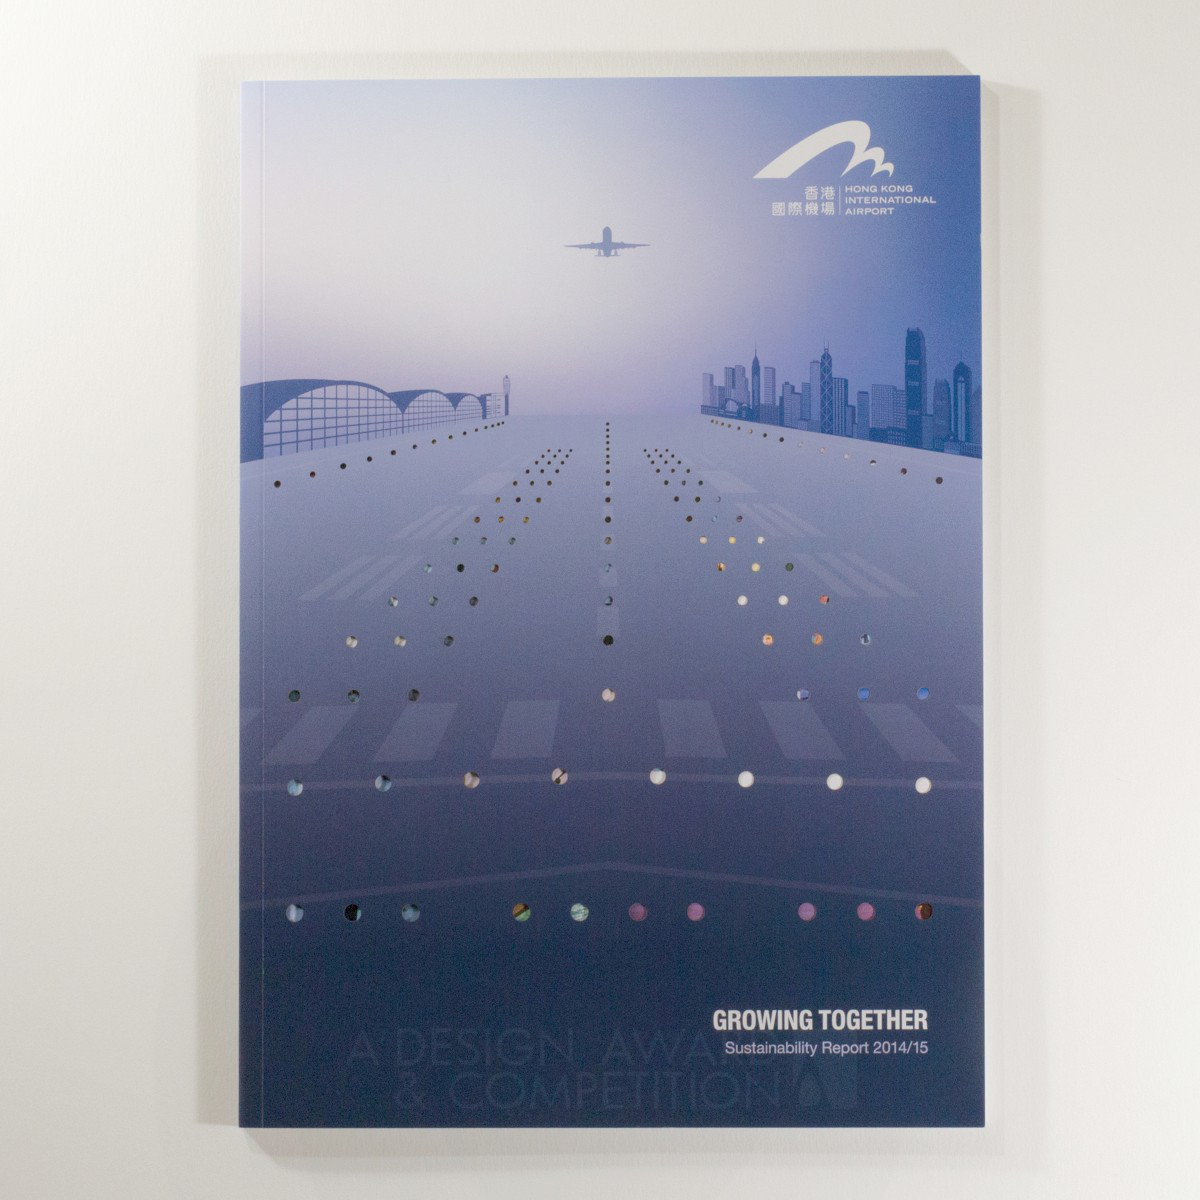 HKIA Sustainability Report  Sustainability Report  by Wai Ming Ng